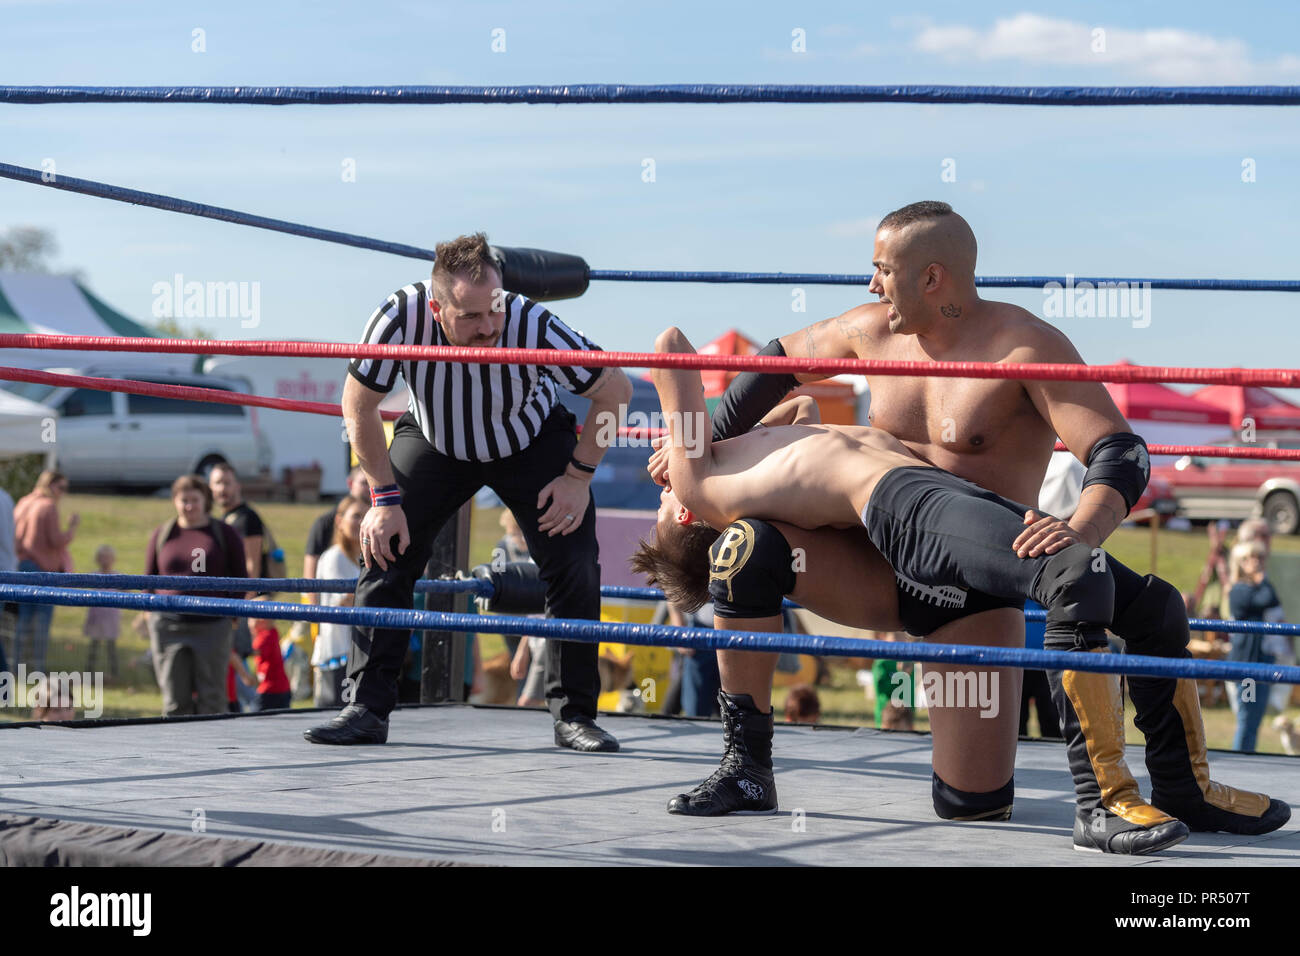 Brentwood Essex 29th September 2018 Essex Country Show in Weald Park Brentwood Essex in glorious autumn sunshine.Outdoor wrestling bout  Credit Ian Davidson/Alamy Live News Stock Photo